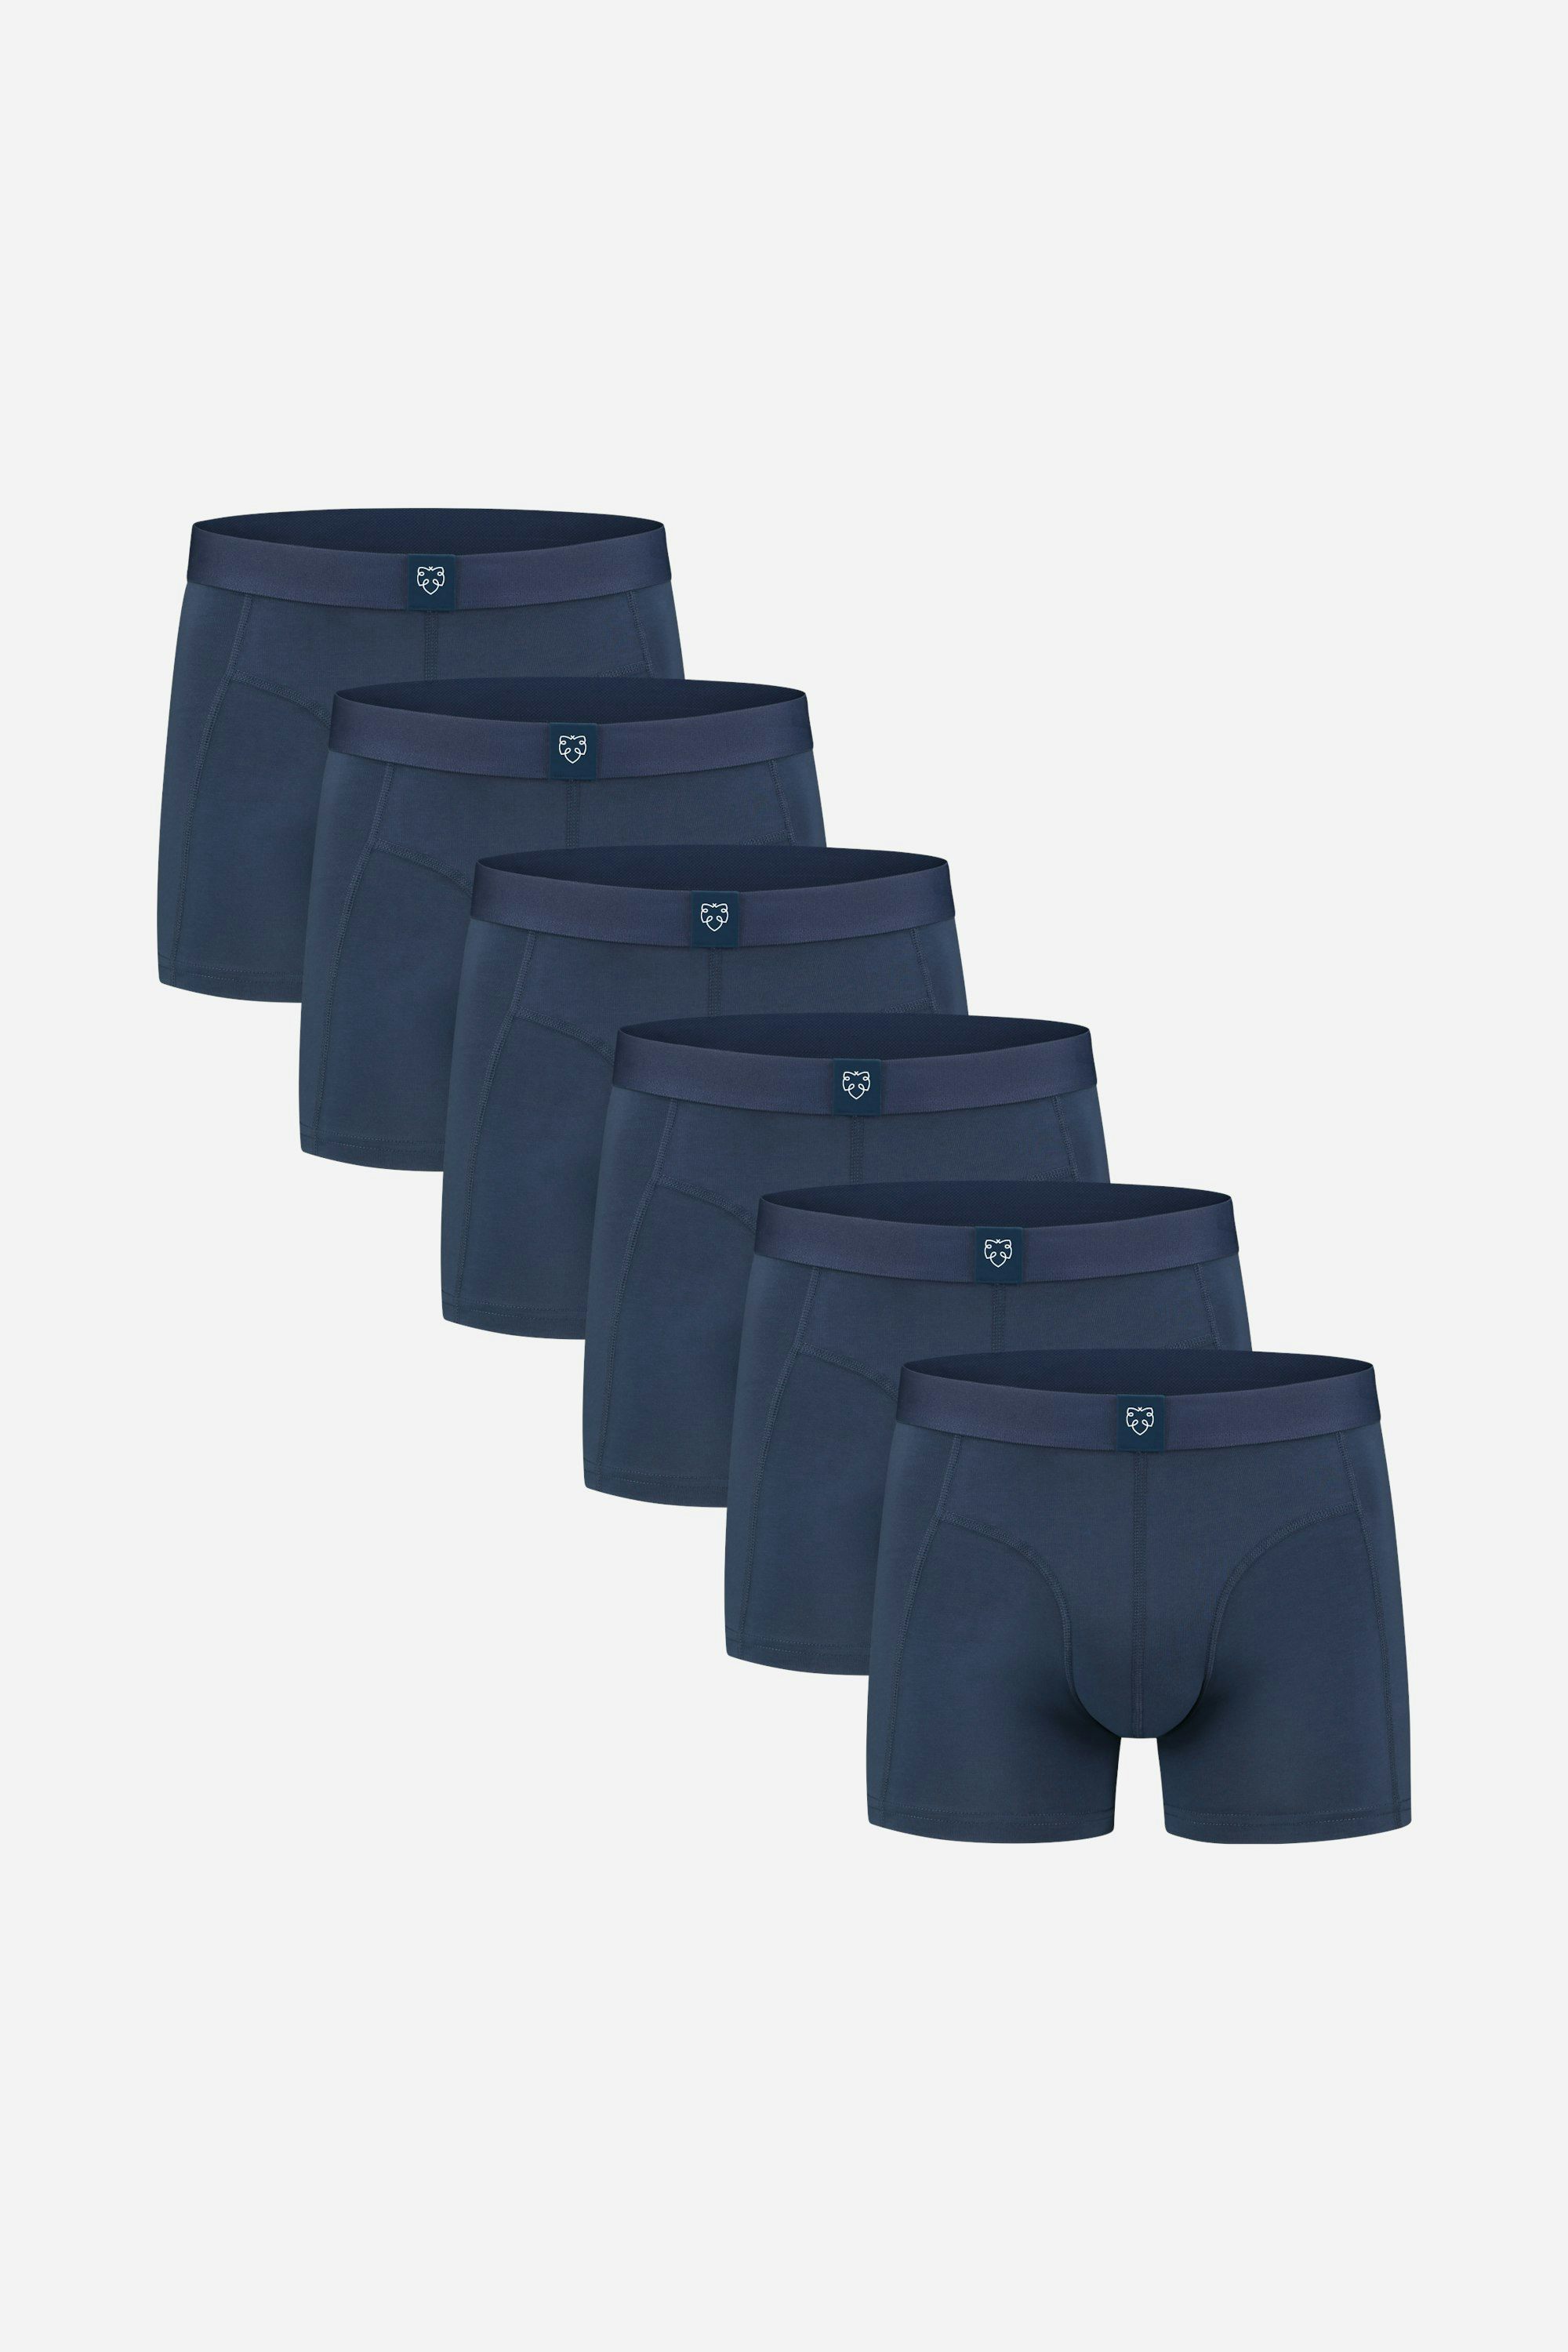 A-dam solid blue boxer brief 6 pack from GOTS pure organic cotton